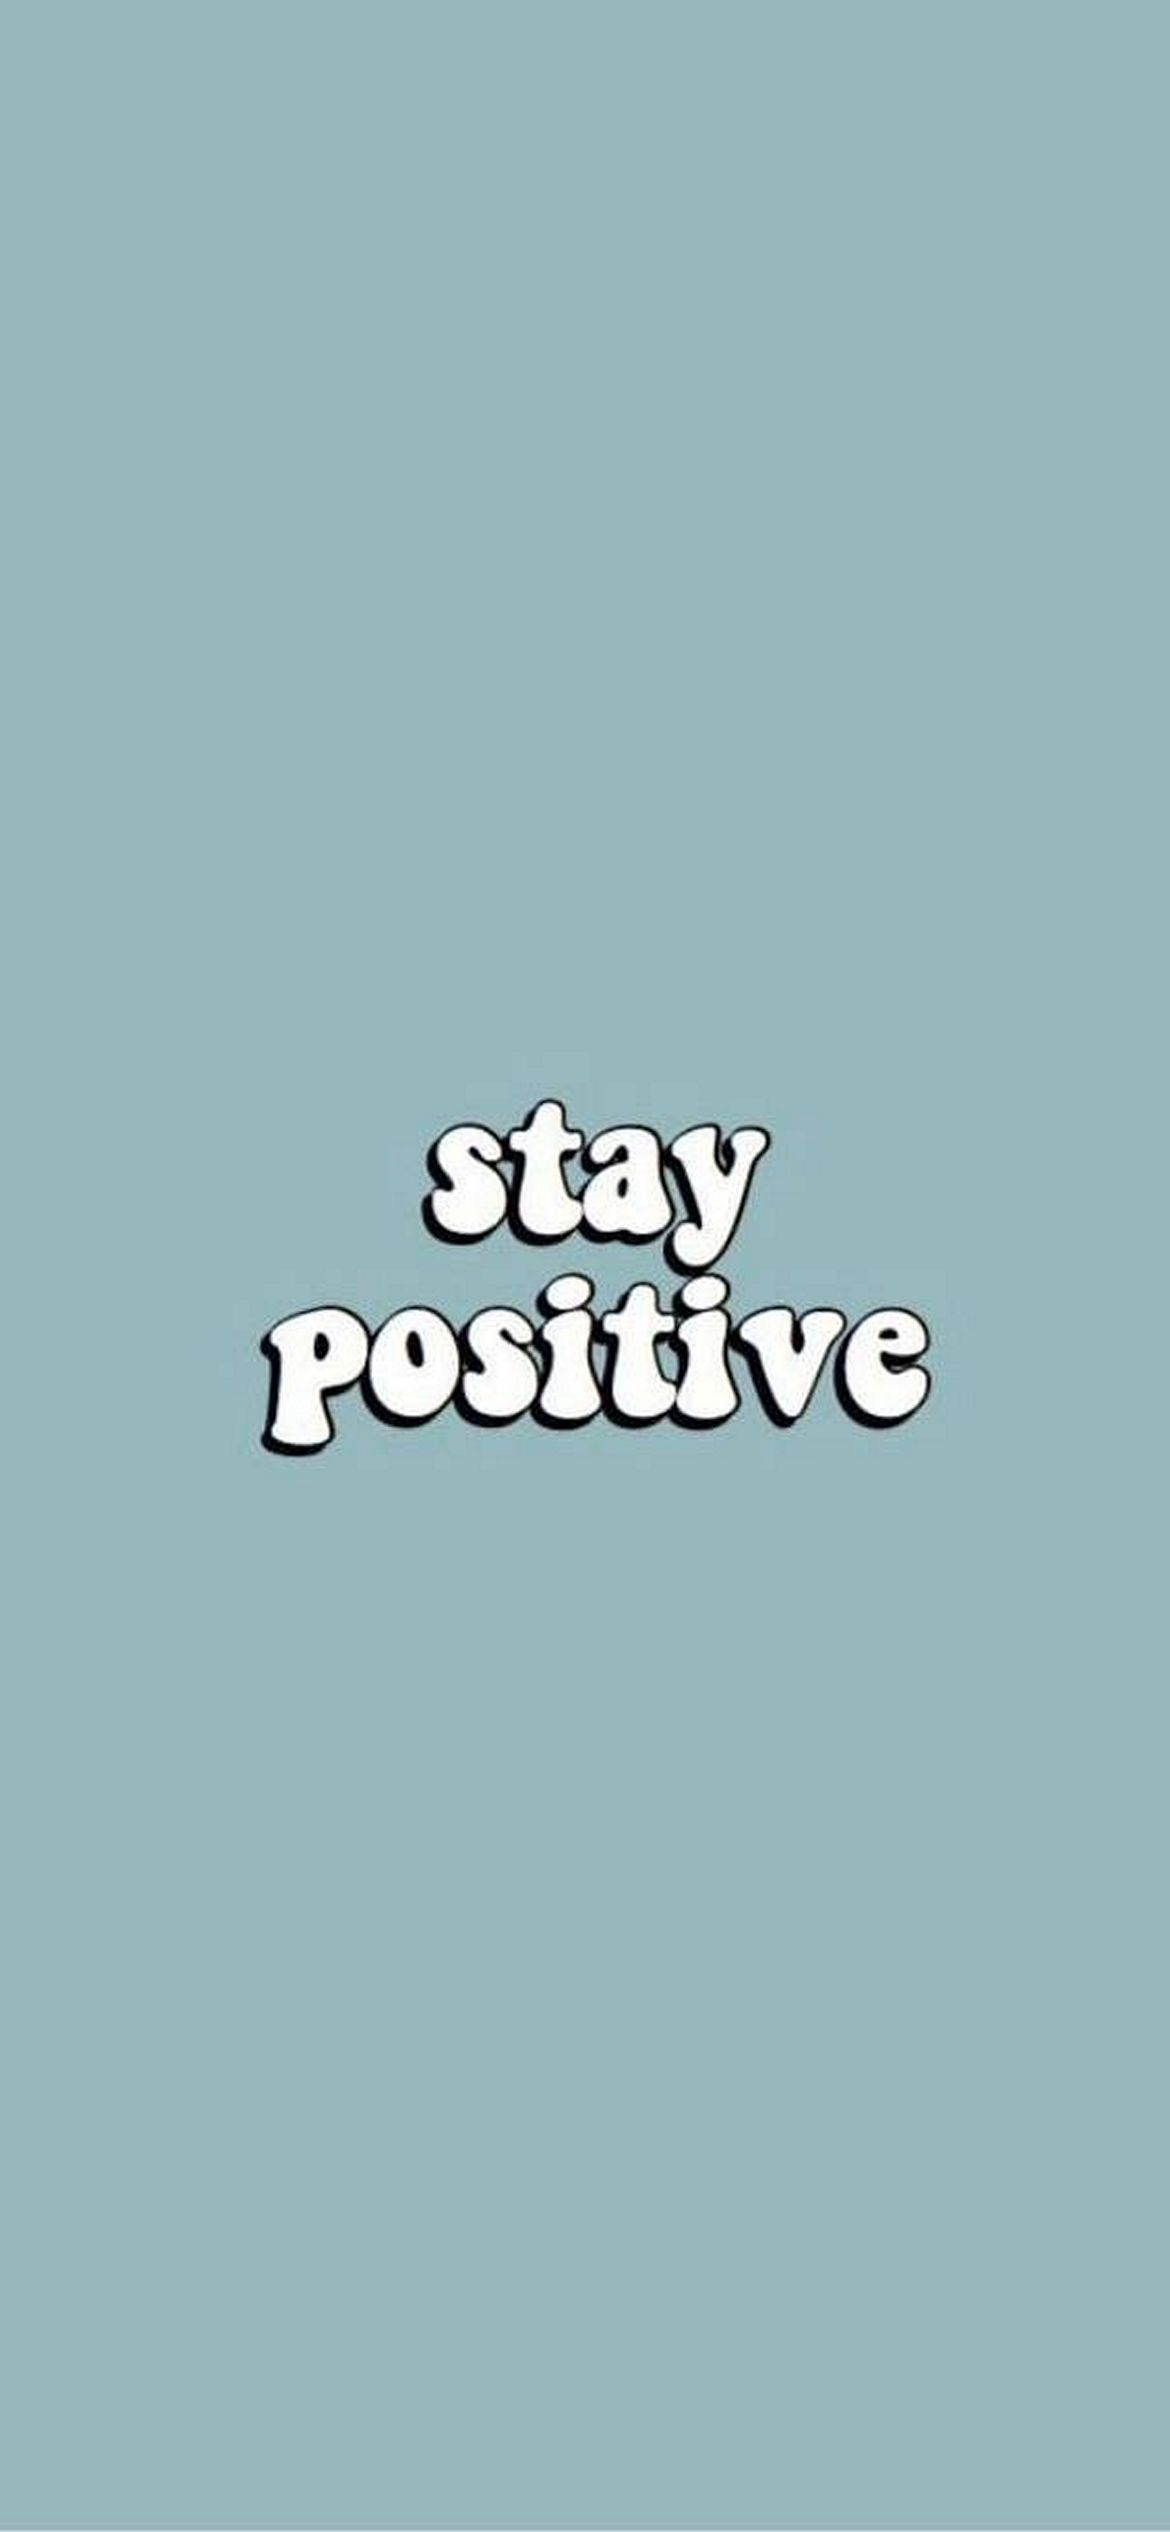 Stay positive wallpaper 1920x - Teal